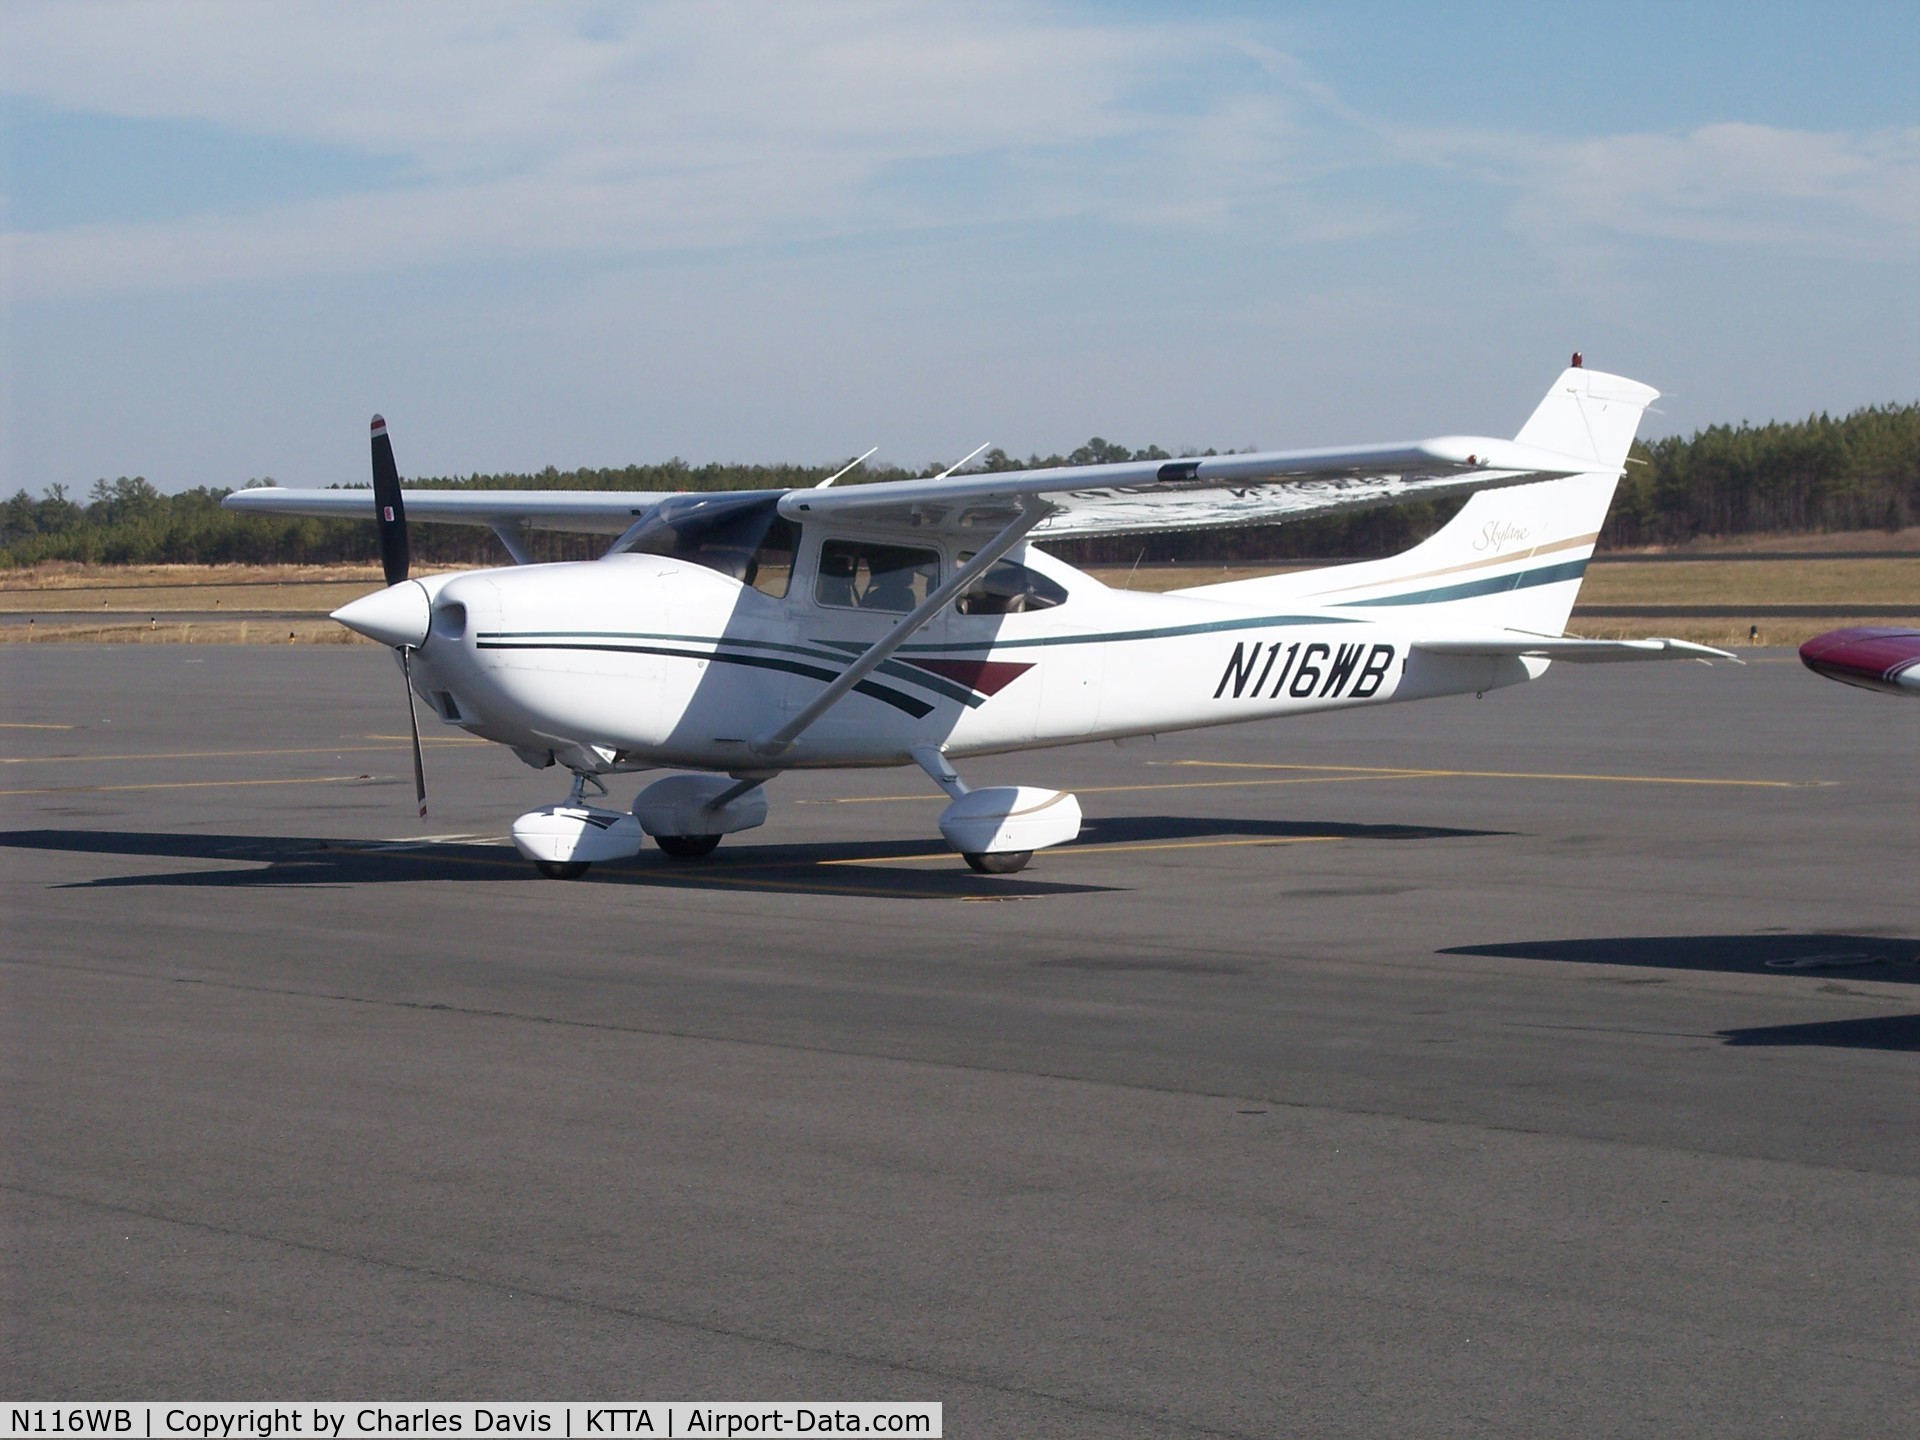 N116WB, 1998 Cessna 182S Skylane C/N 18280170, Photo taken in Sanford, NC where this aircraft is based